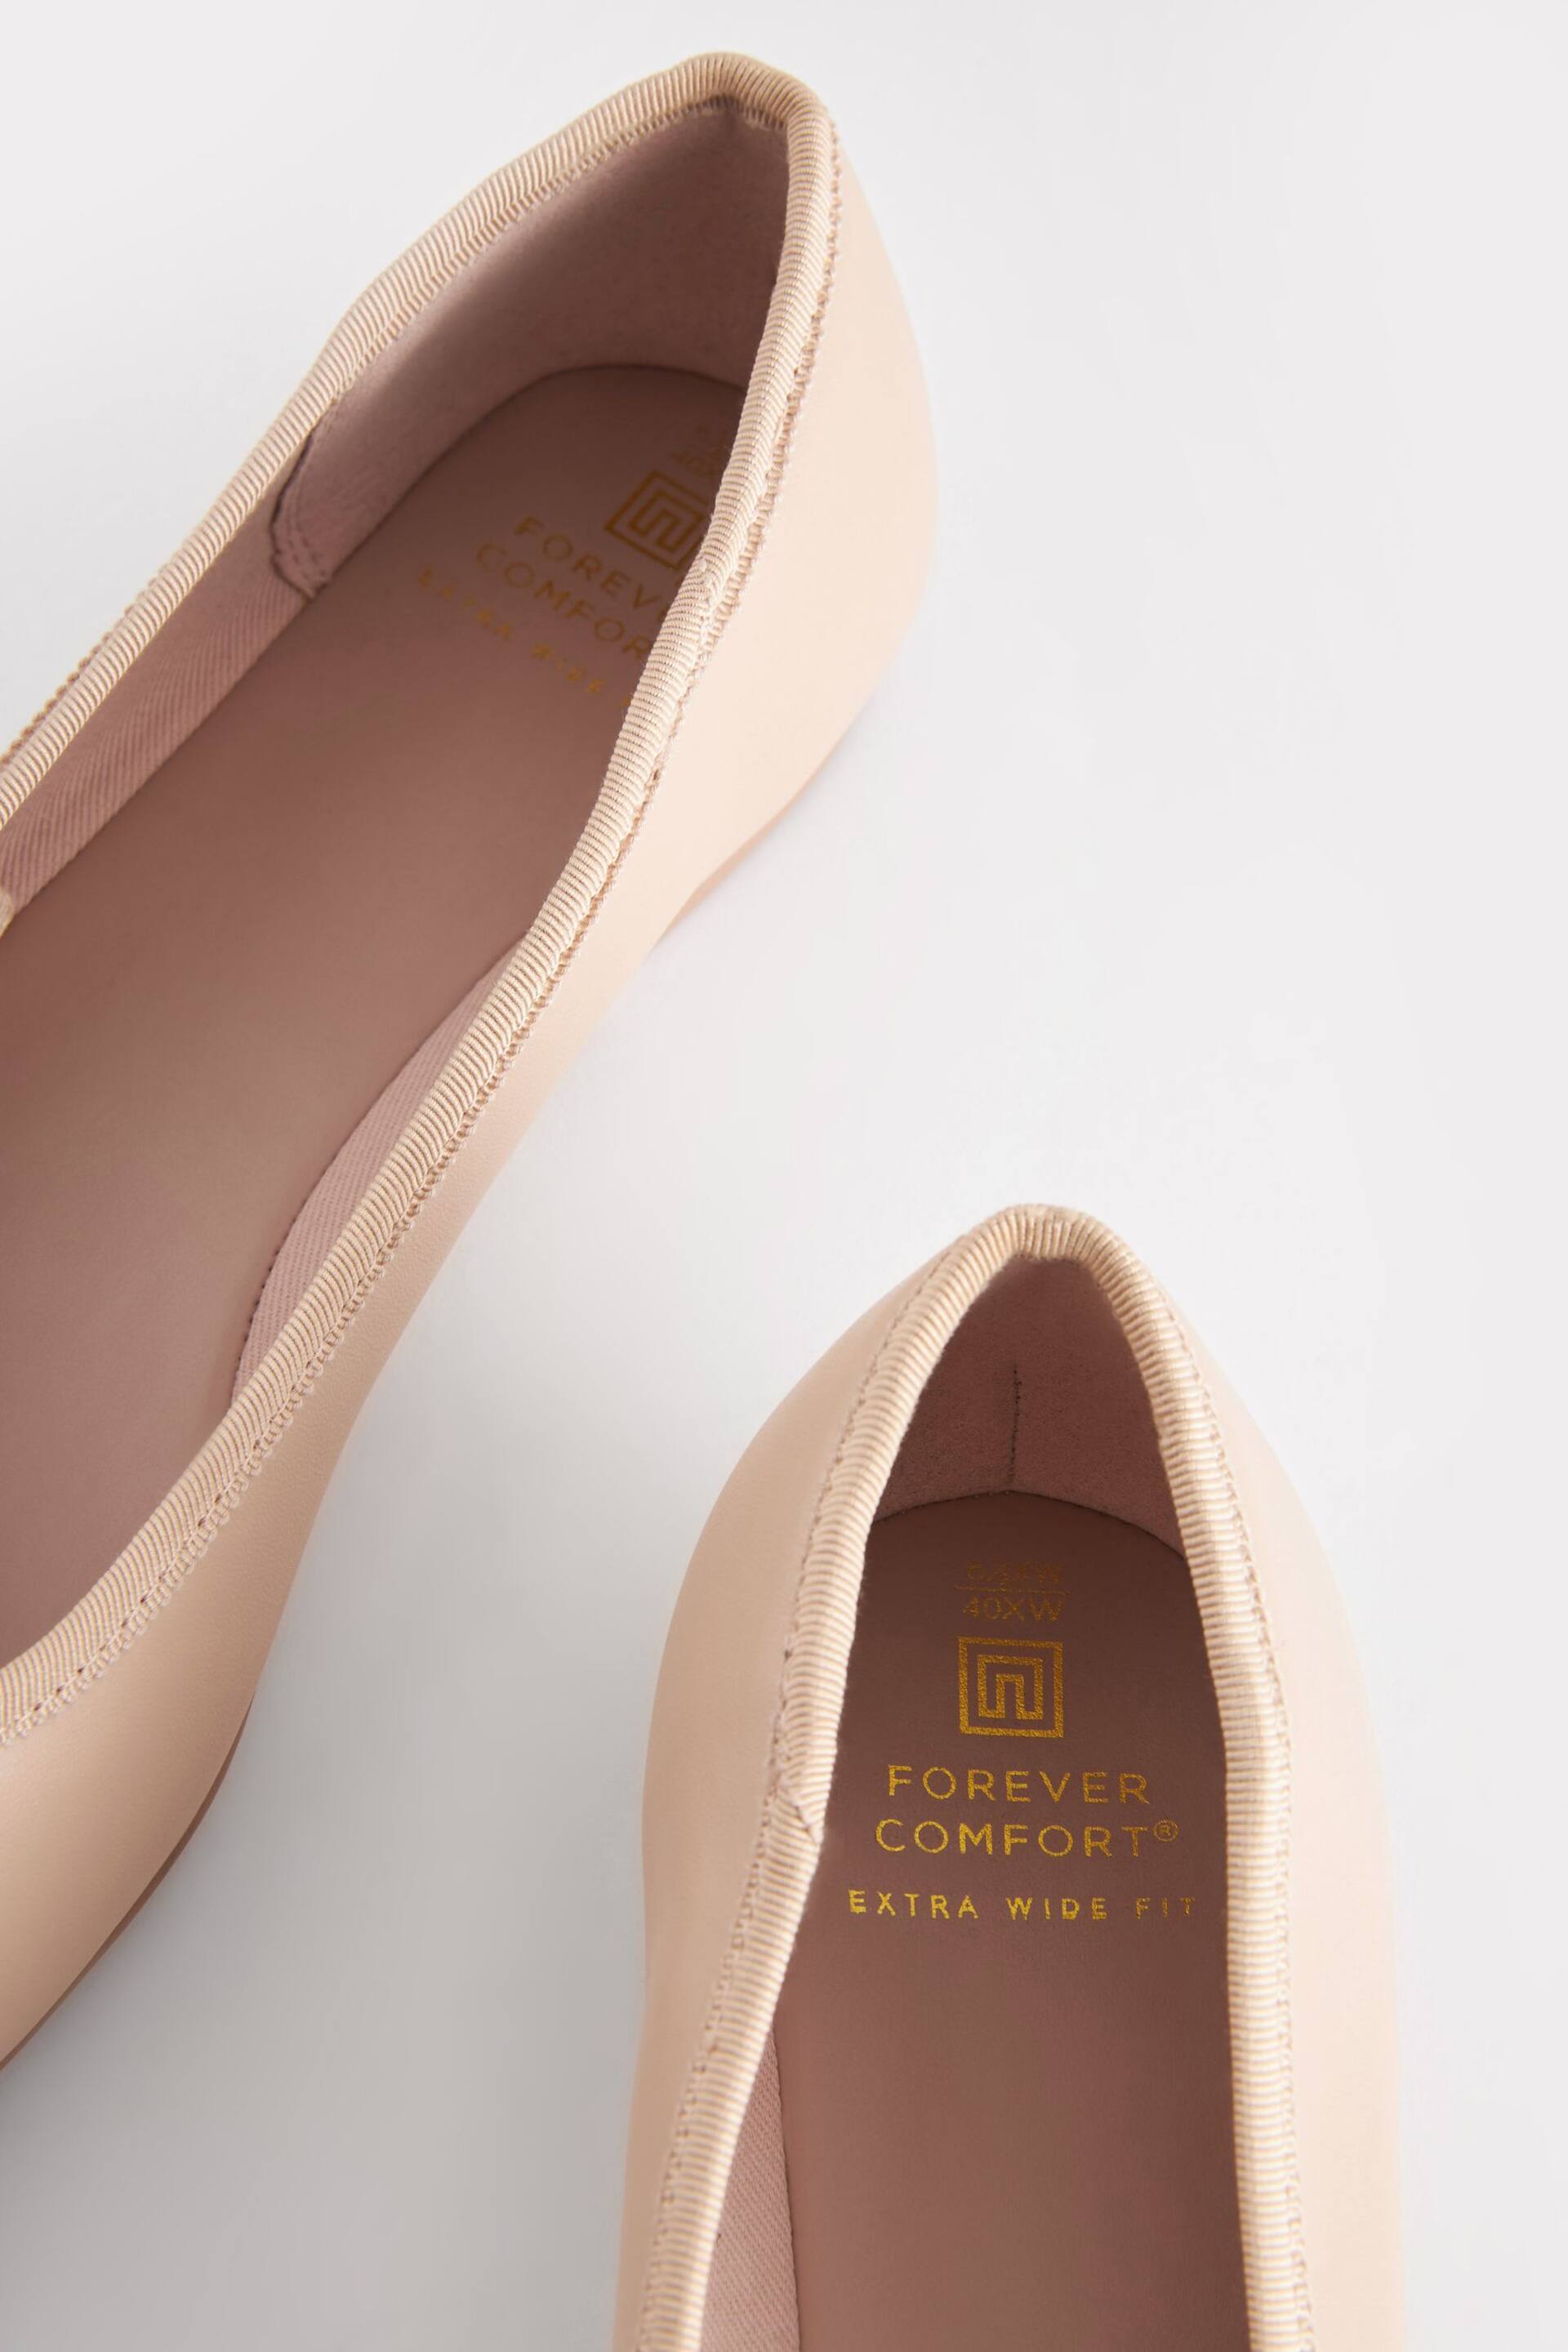 Nude Cream/Black Toe Cap Extra Wide Fit Forever Comfort® Ballerinas Shoes - Image 7 of 7